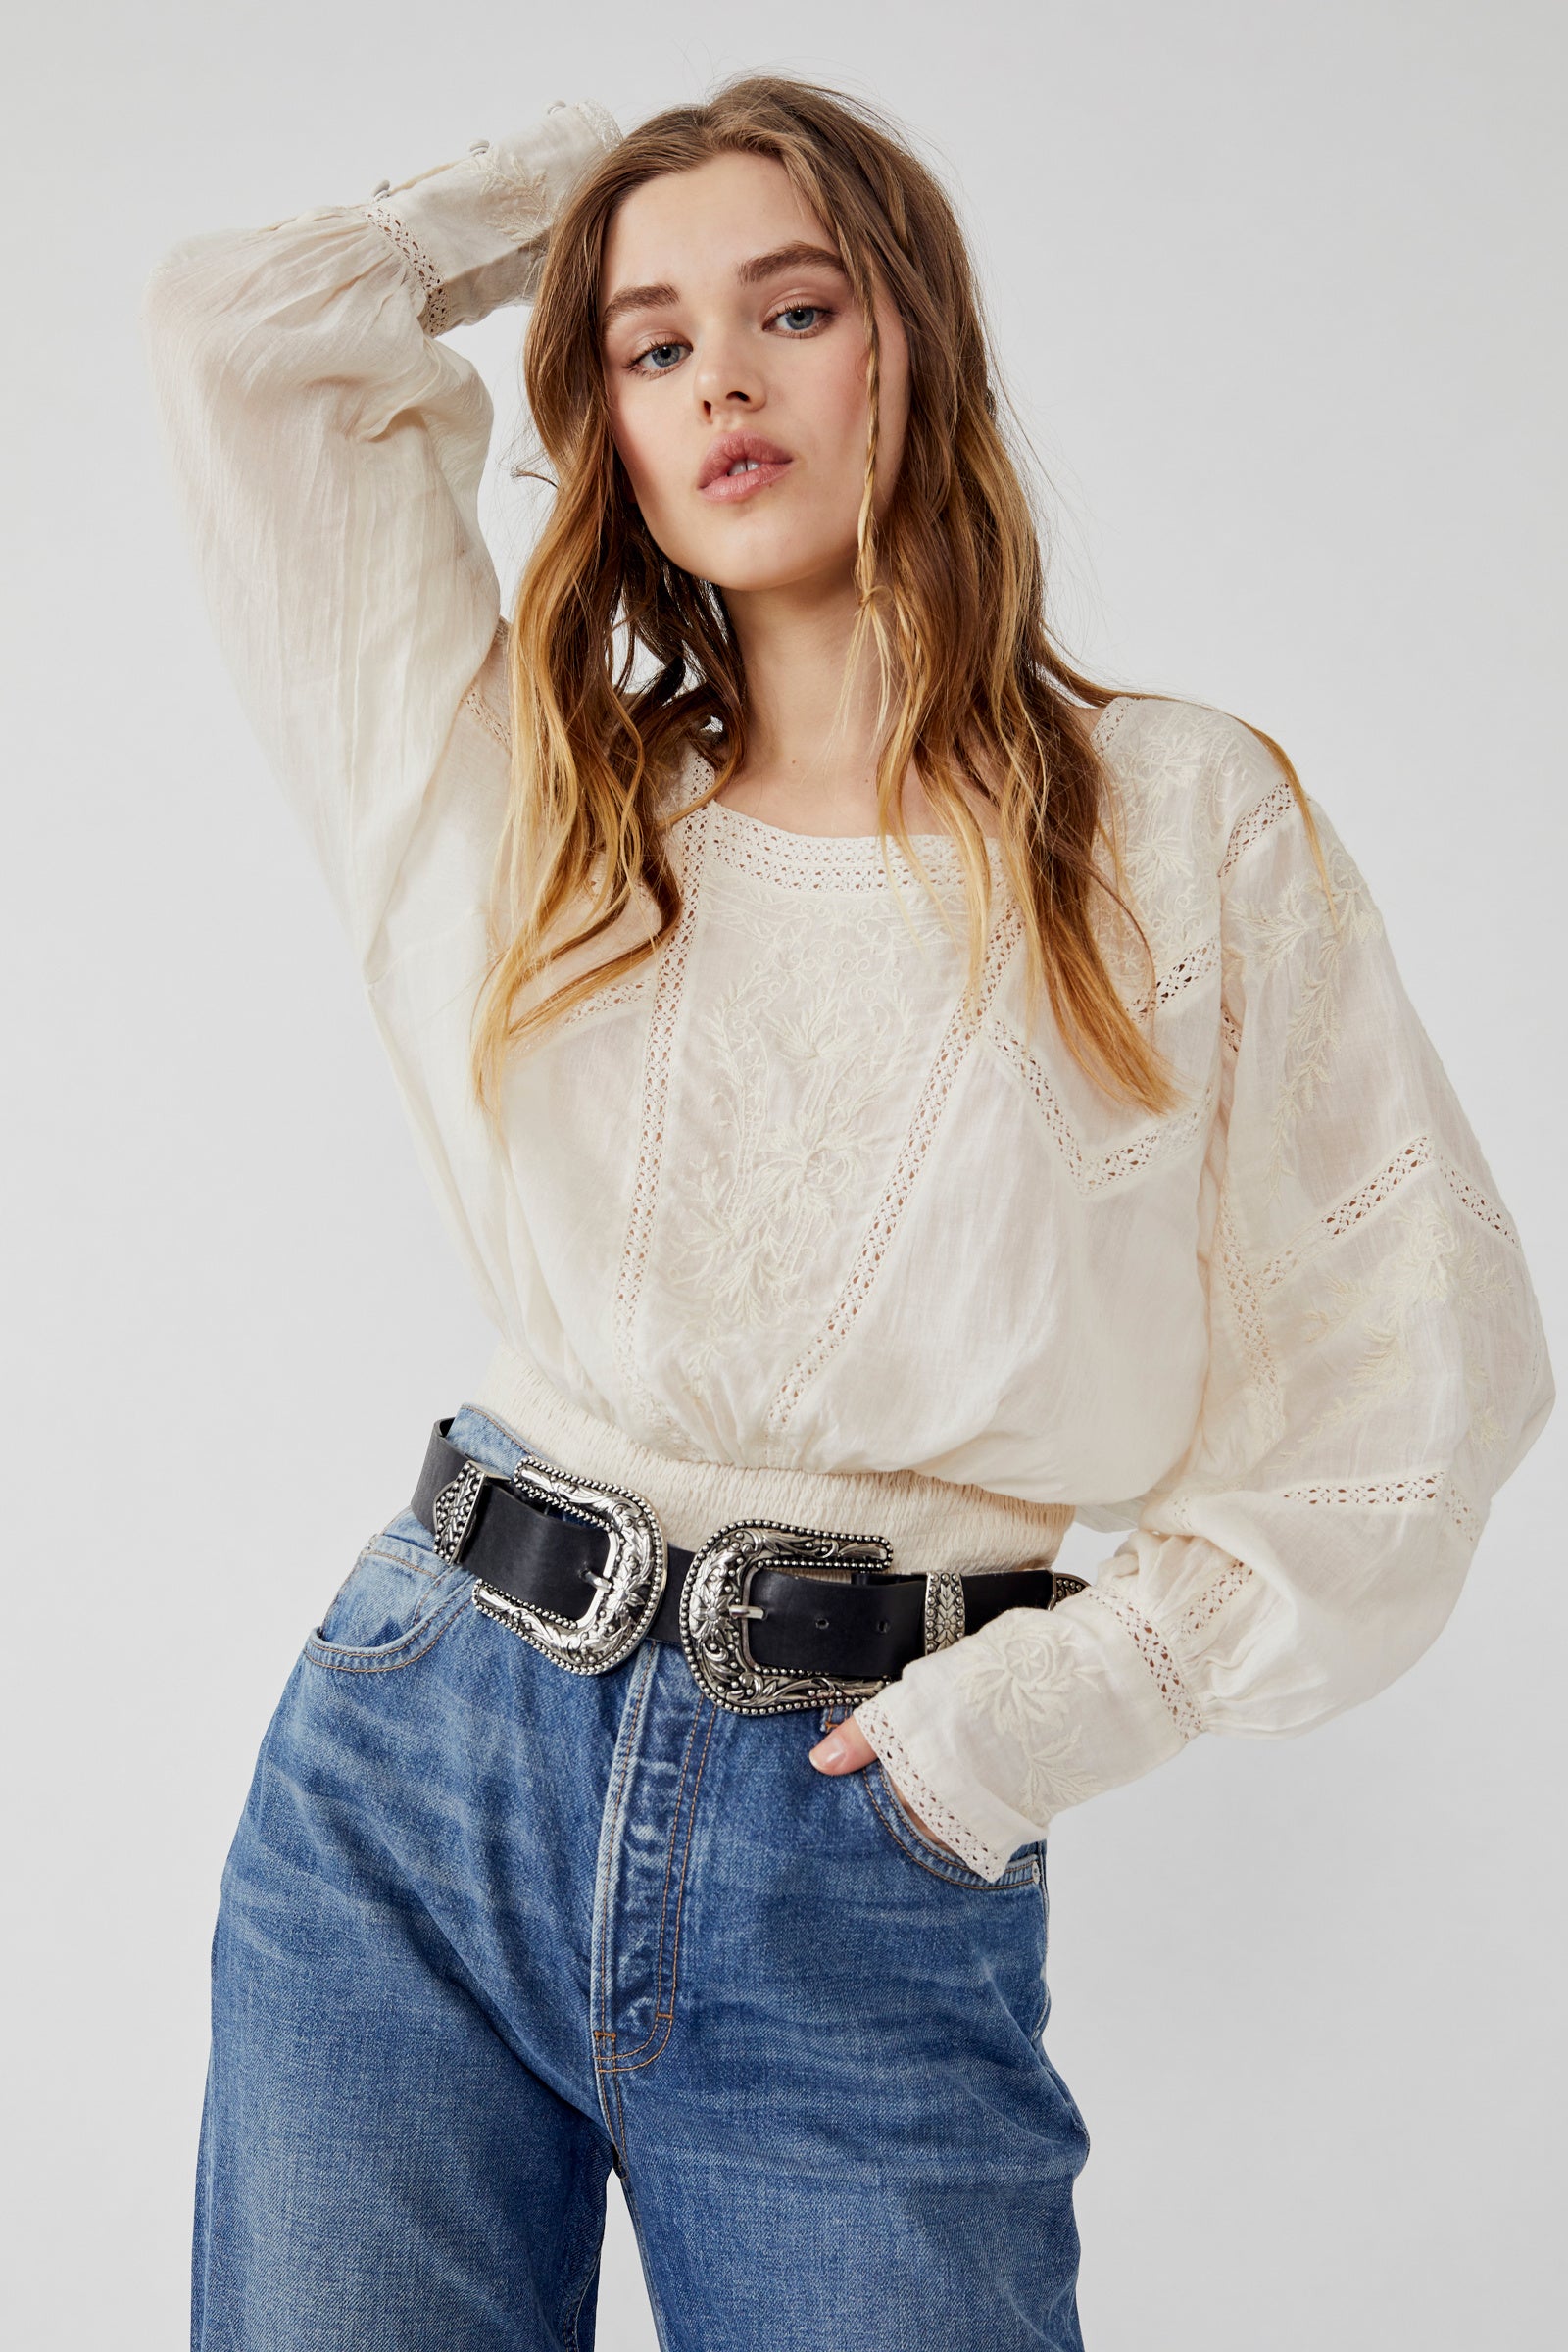 FREE PEOPLE LUCKY ME LACE TOP – Elaine Dickinson